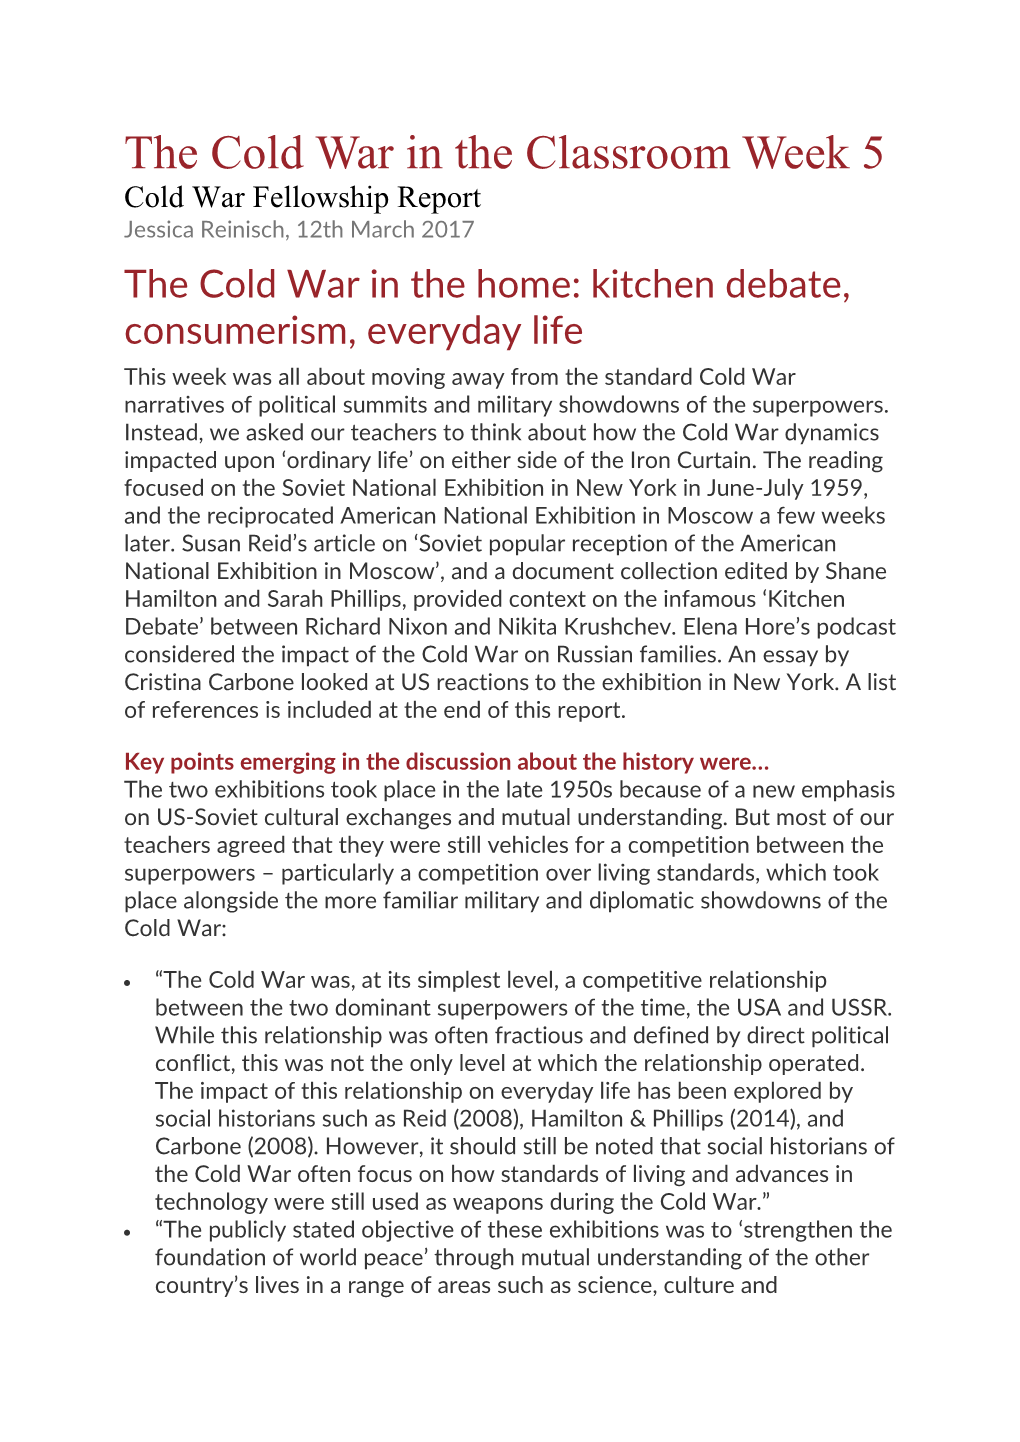 The Cold War in the Classroom Week 5